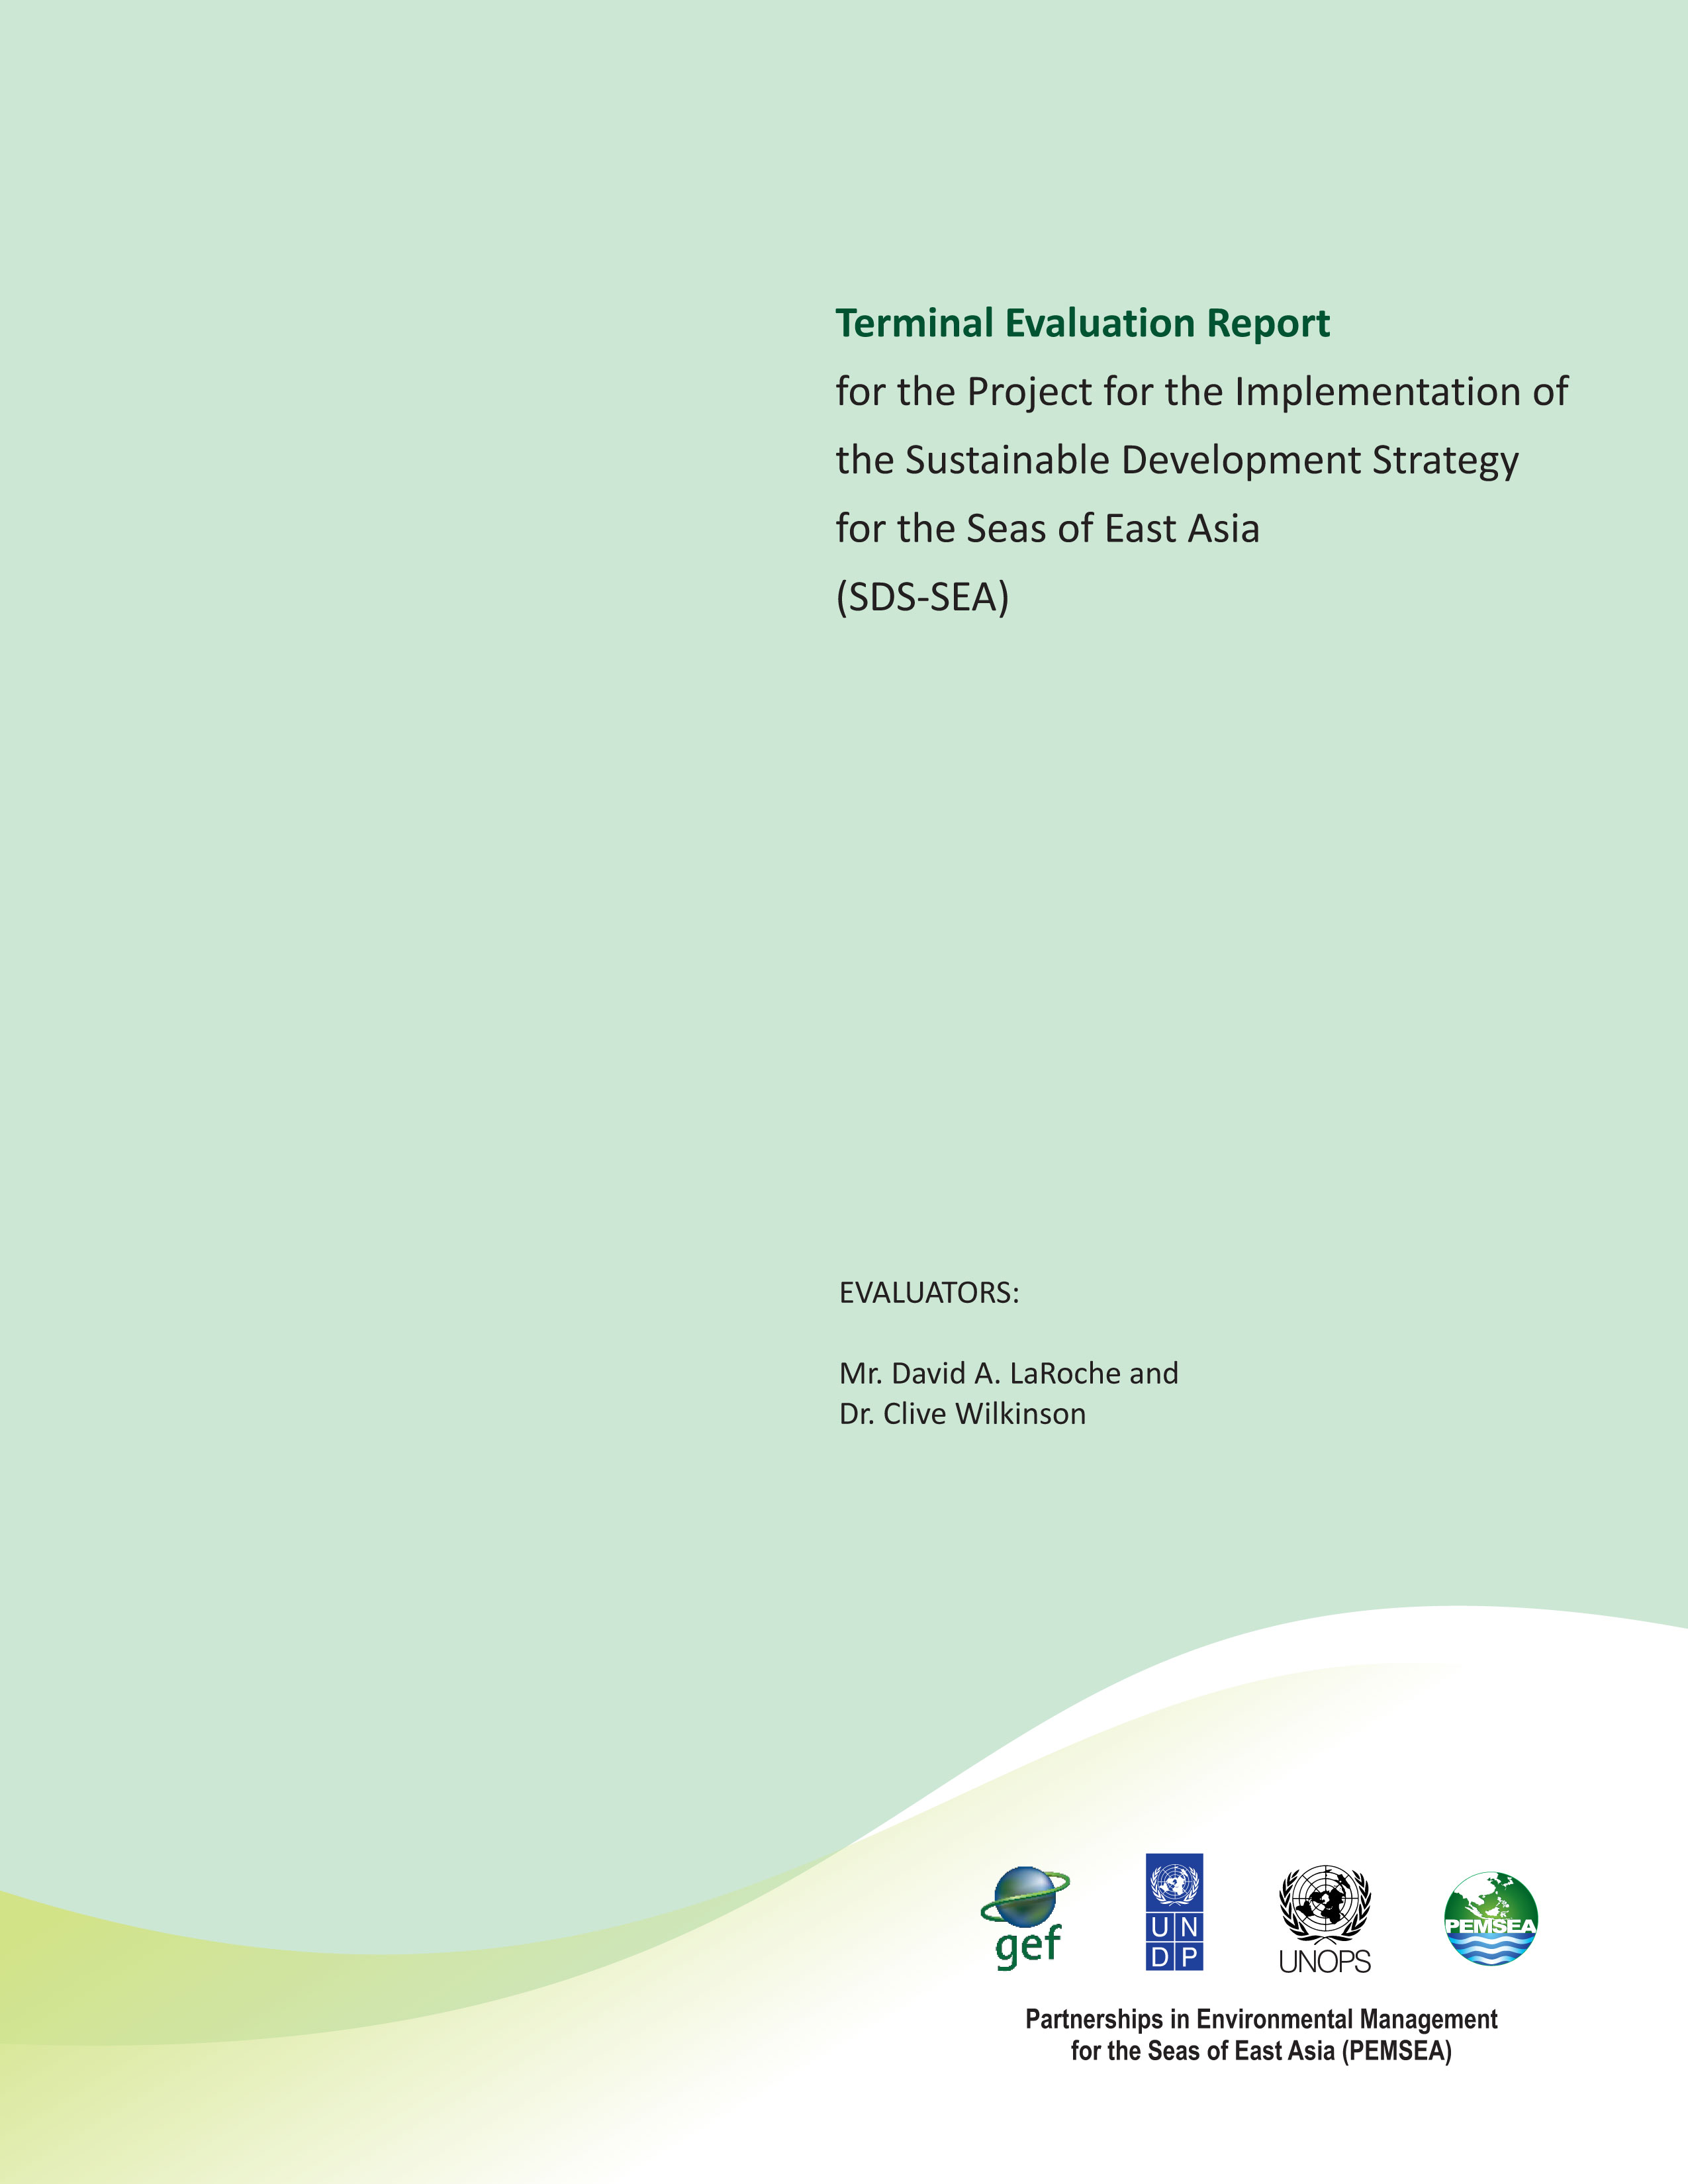 Terminal Evaluation Report for the Project for the Implementation of the Sustainable Development Strategy for the Seas of East Asia (SDS-SEA)